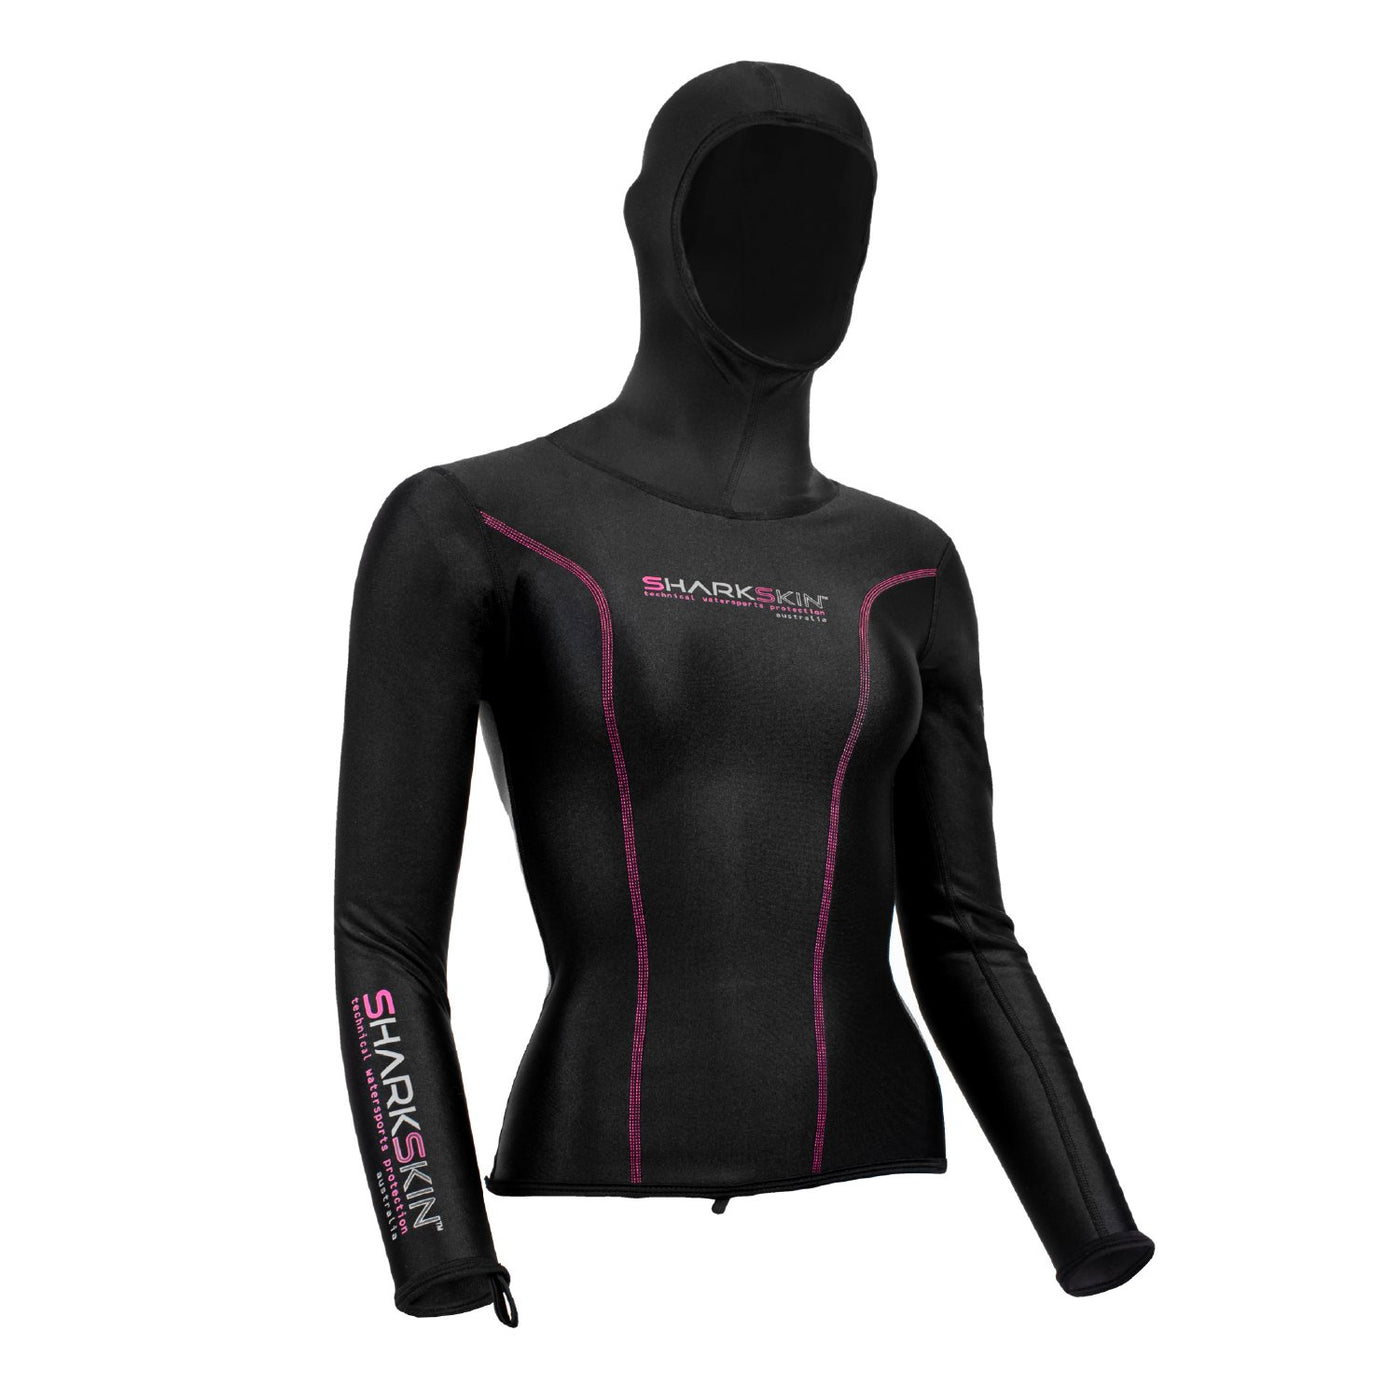 CHILLPROOF LONG SLEEVE WITH HOOD - WOMENS